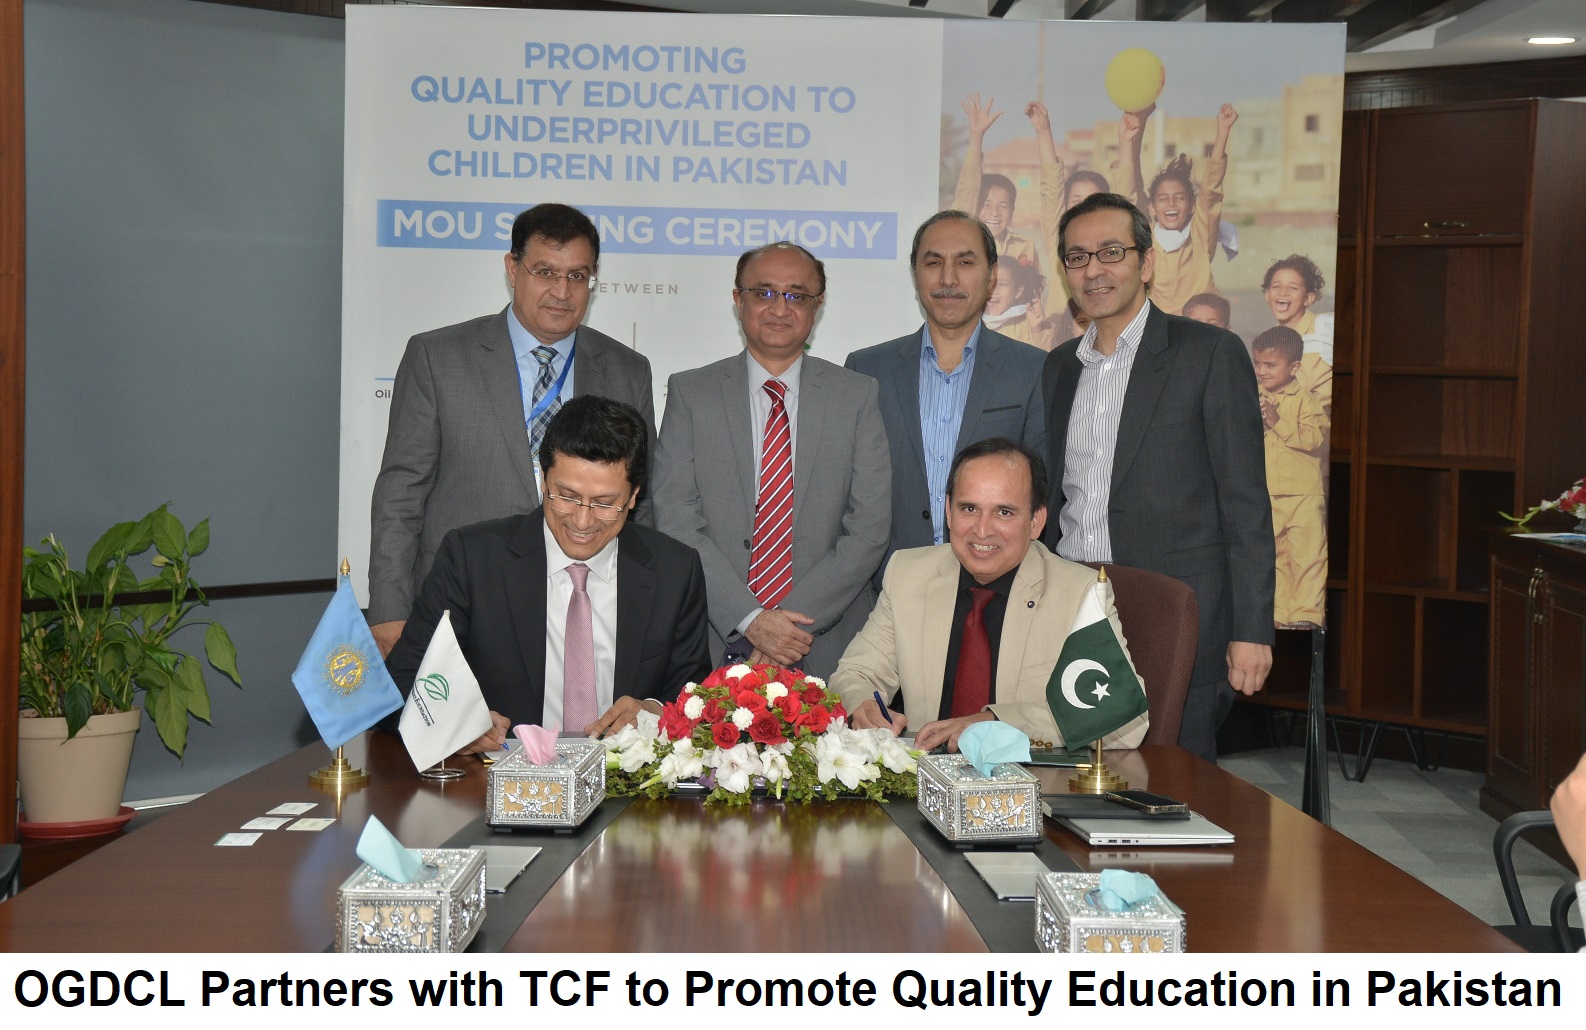 OGDCL partners with TCF to promote quality education in Pakistan